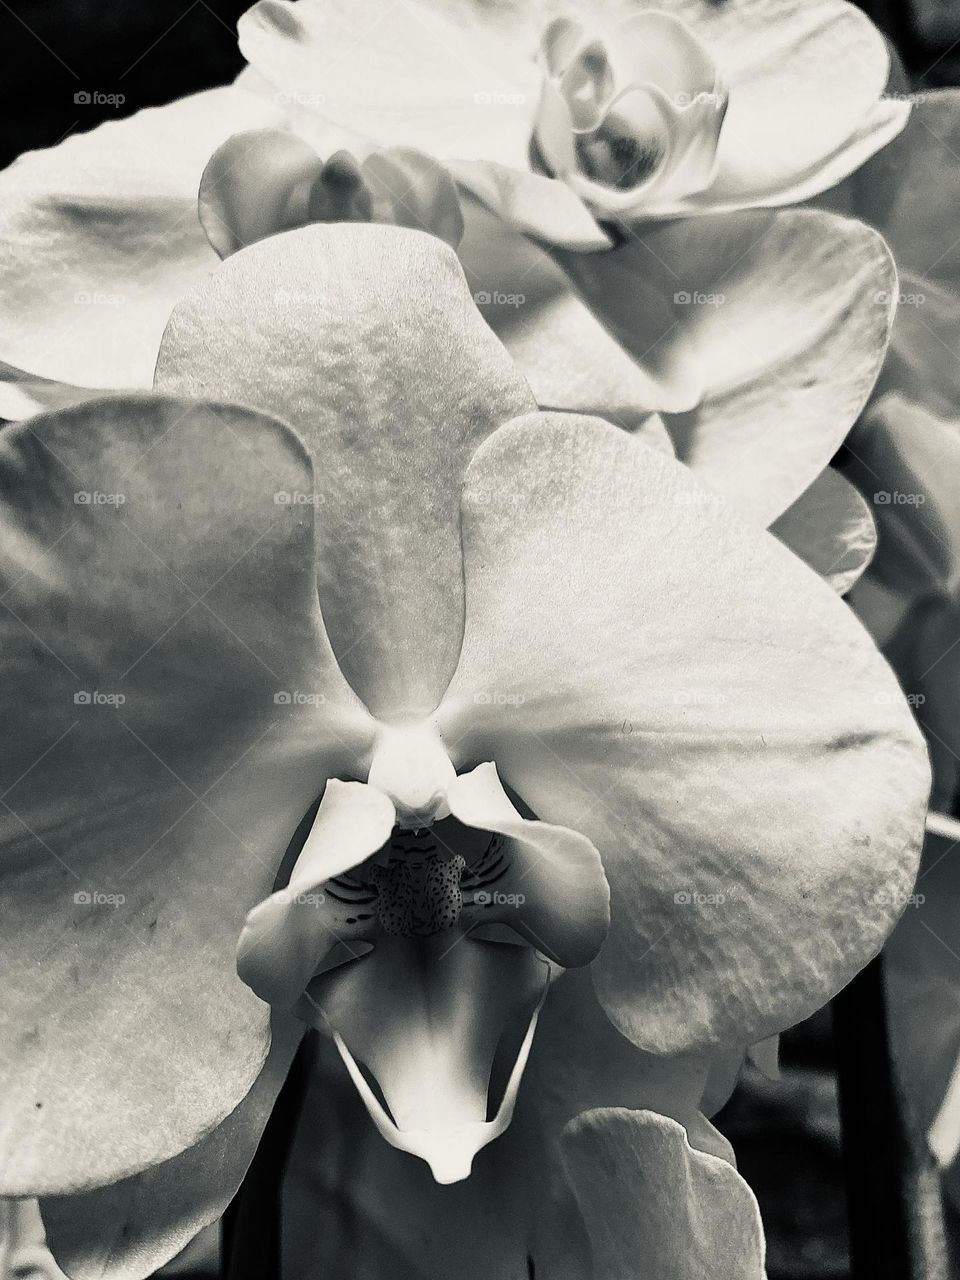 Black and white orchid